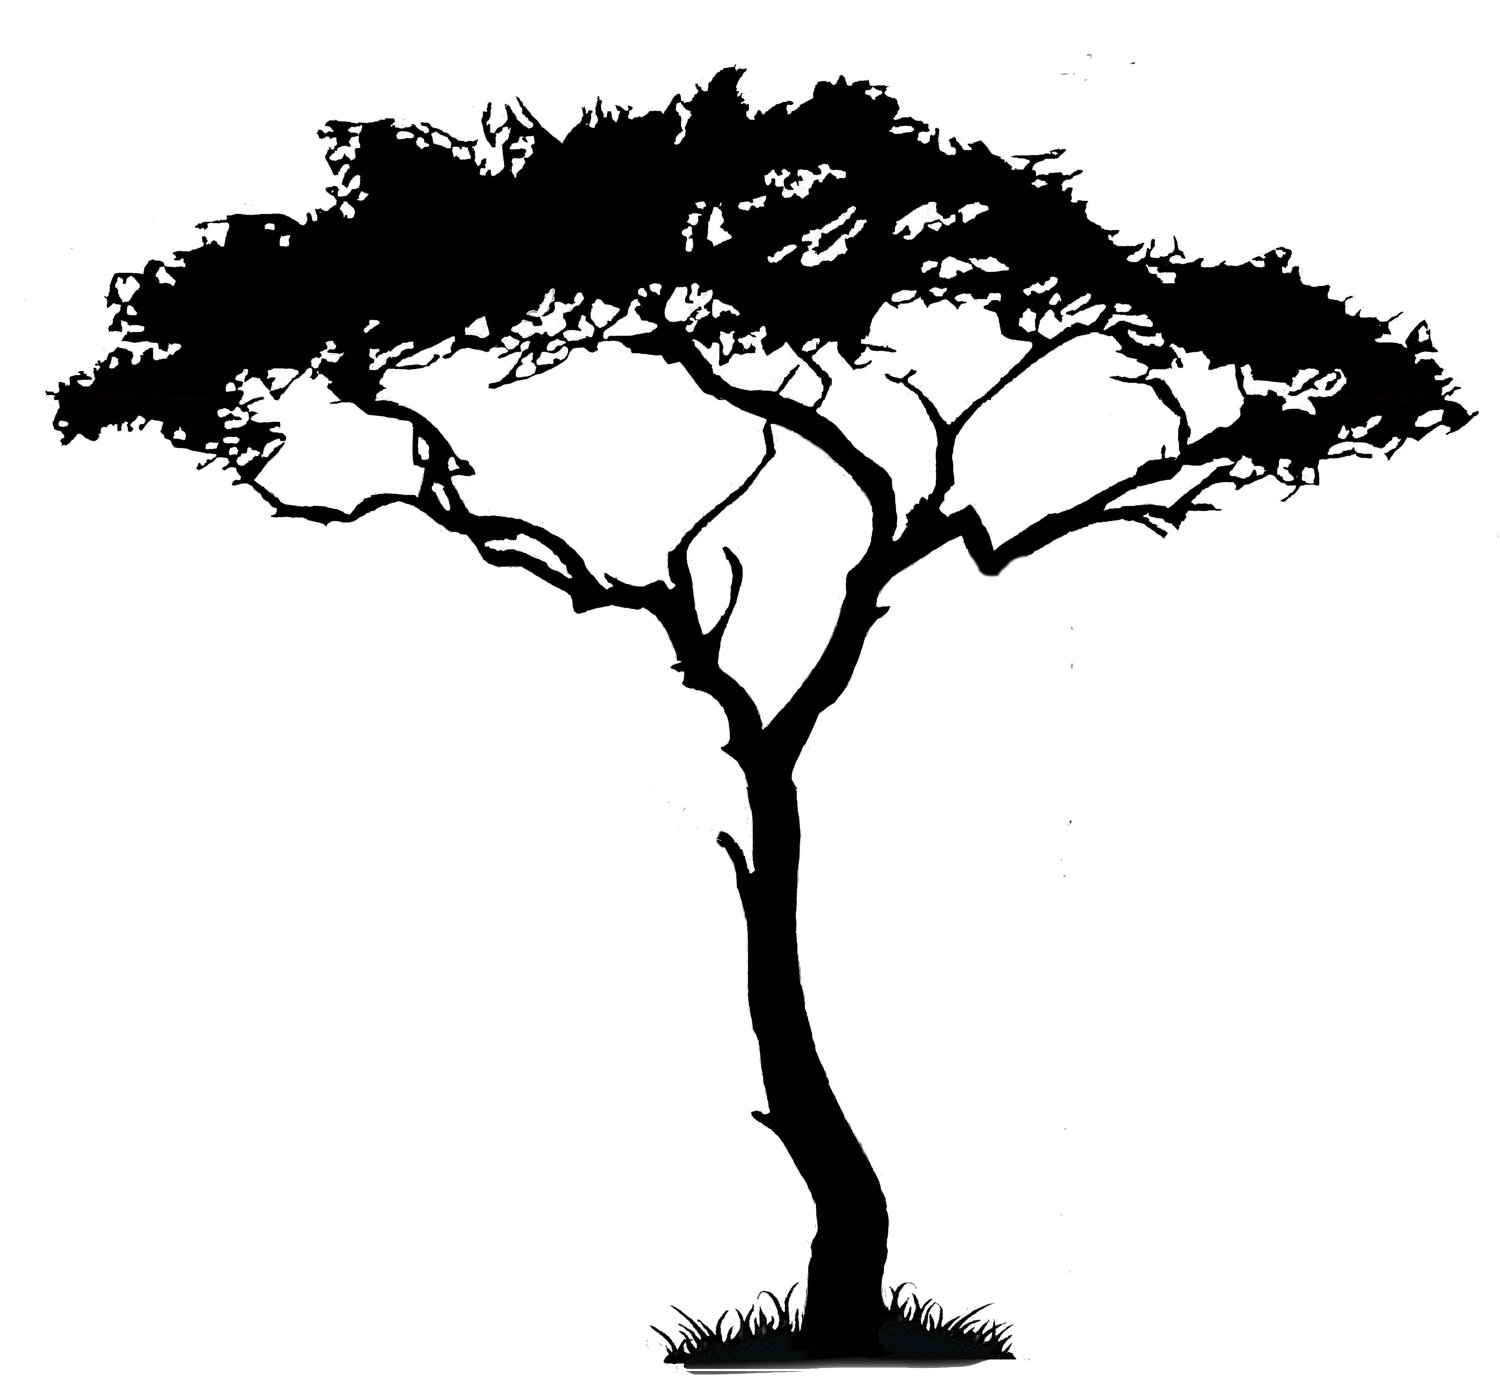 Acacia Tree Silhouette Clipart - ClipArt Best